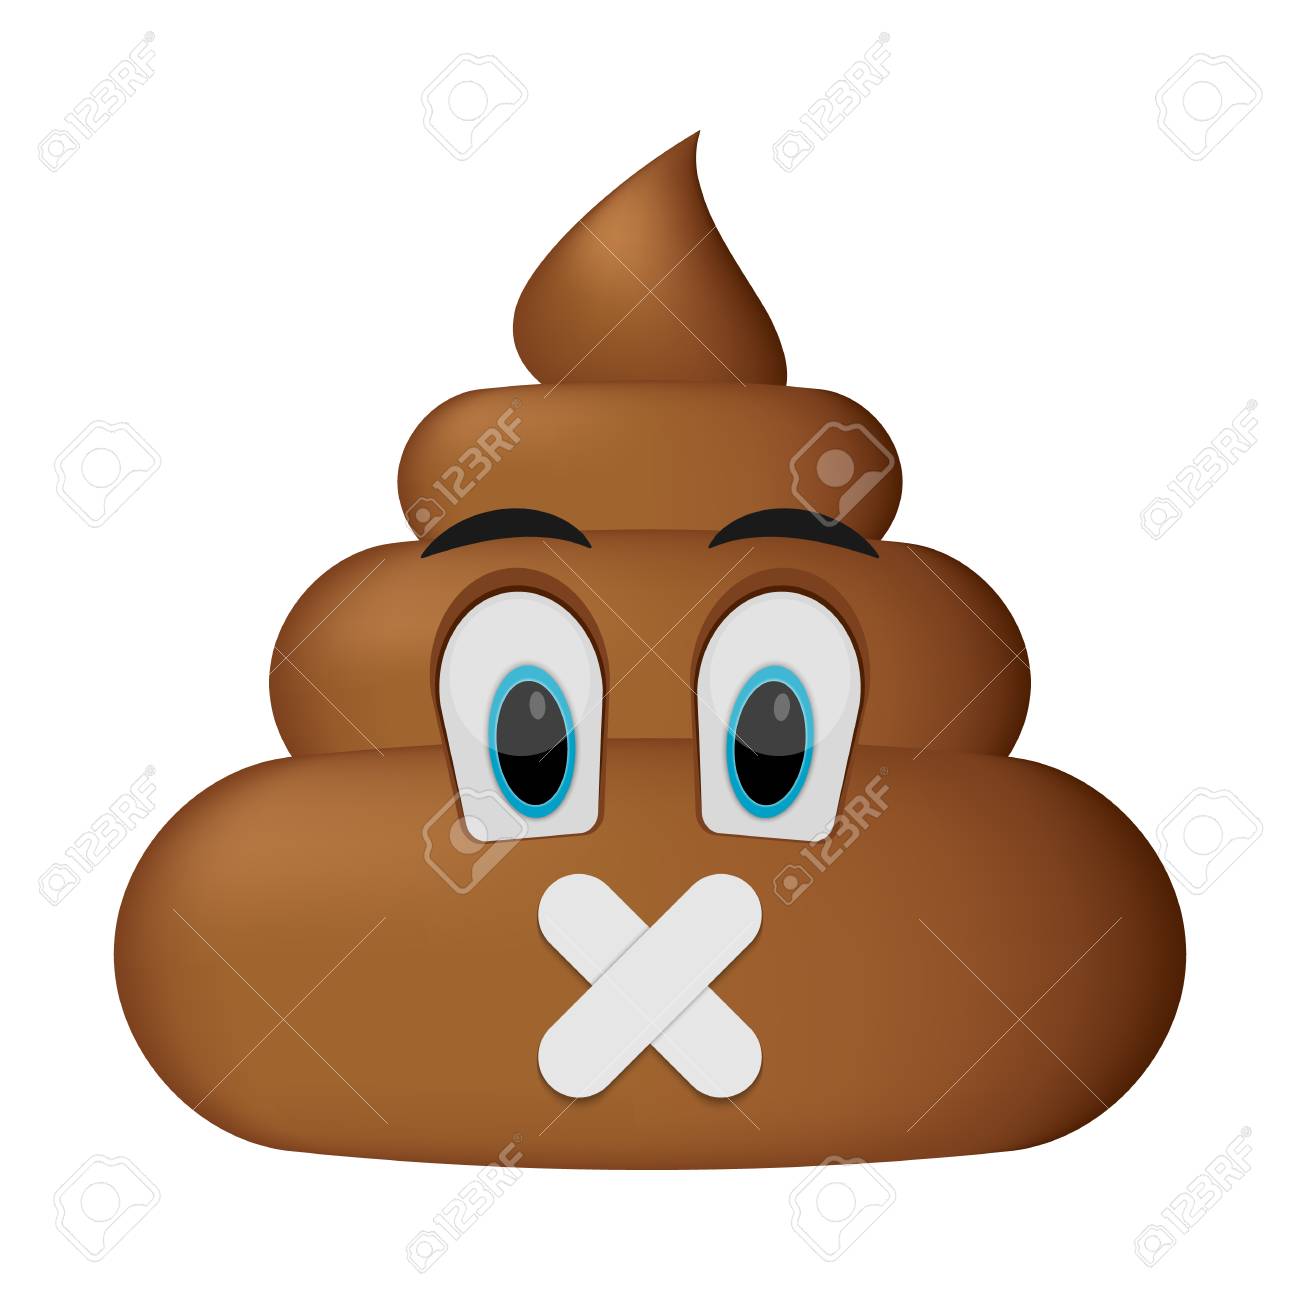 Poo Icon Shut Up Faces Poop Emoticon Isolated On White